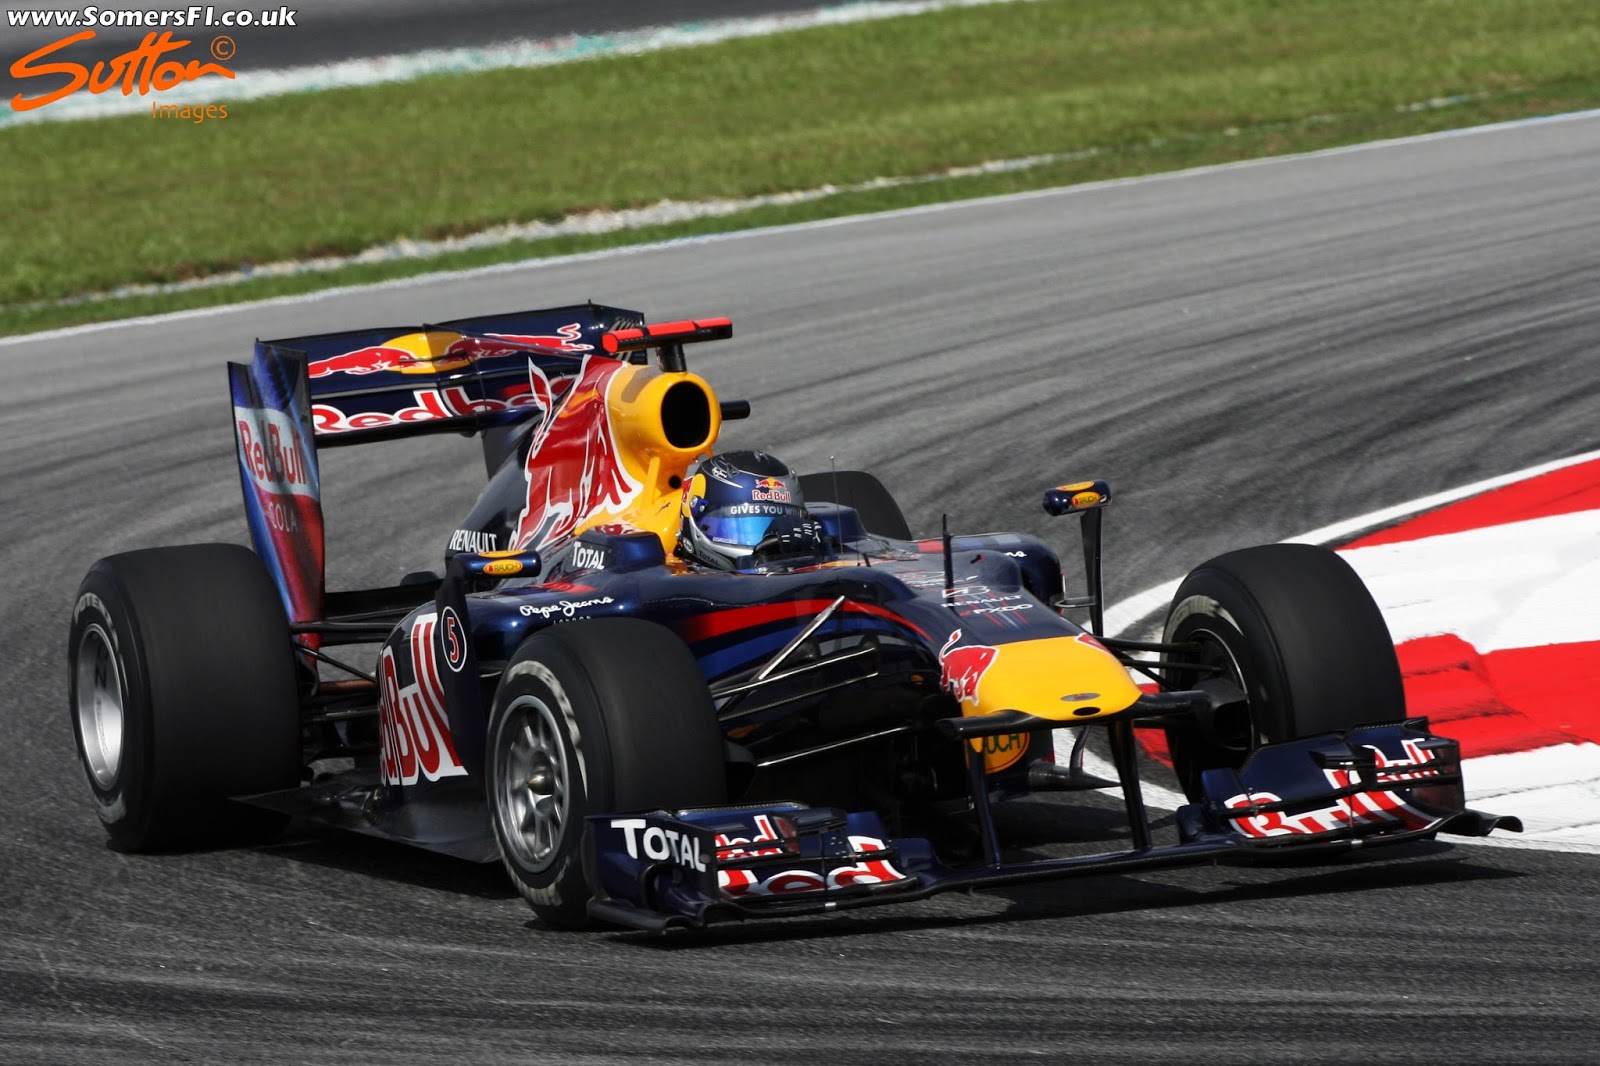 #TechF1LE - Red Bull RB6 - Round 3 Malaysian GP technical image gallery ...